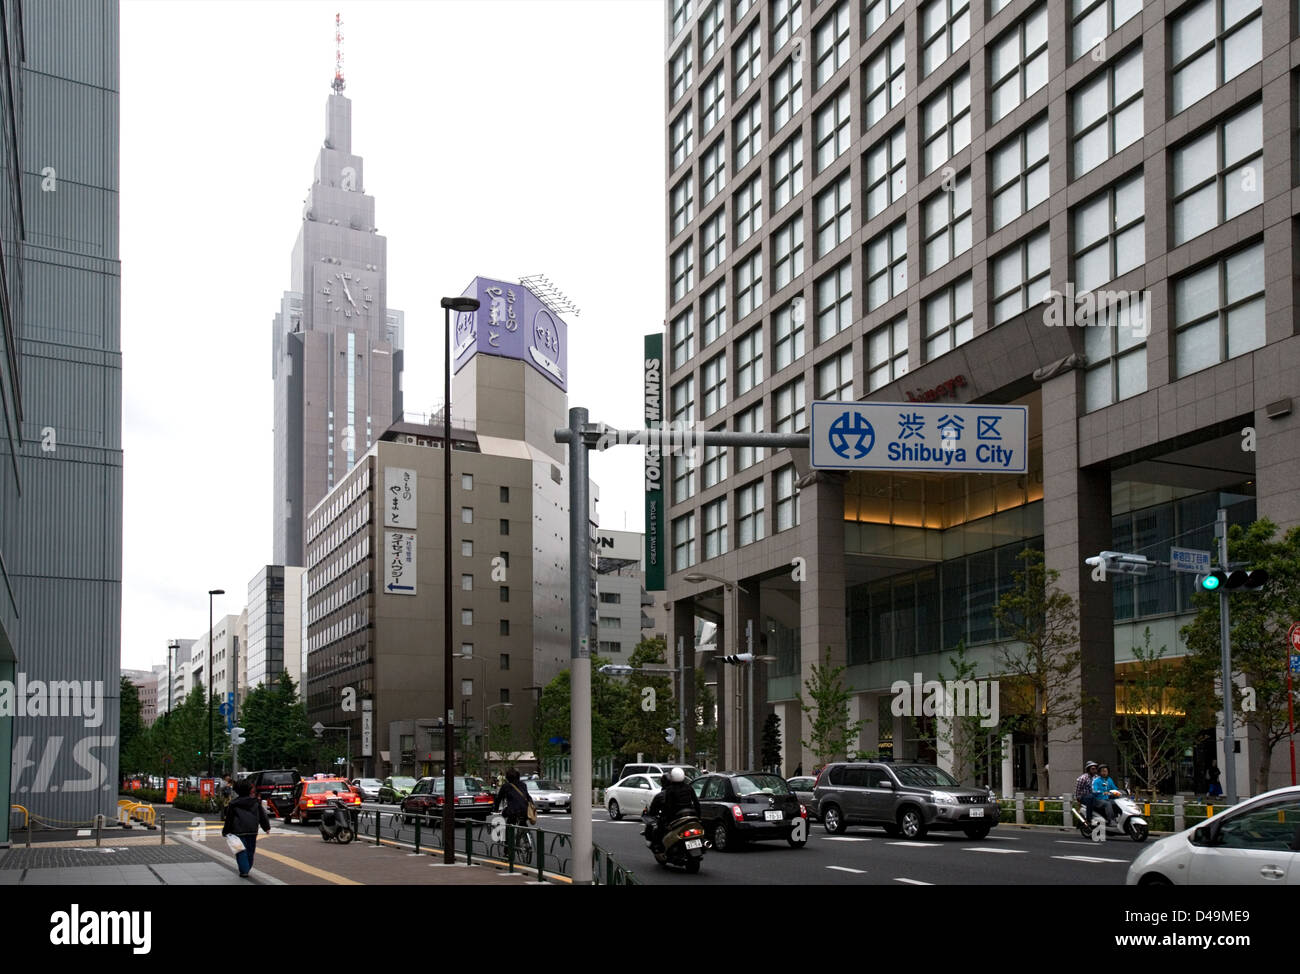 Street scene in Shibuya, Tokyo with the NTT Docomo building and the Tokyu Hands department store. Stock Photo